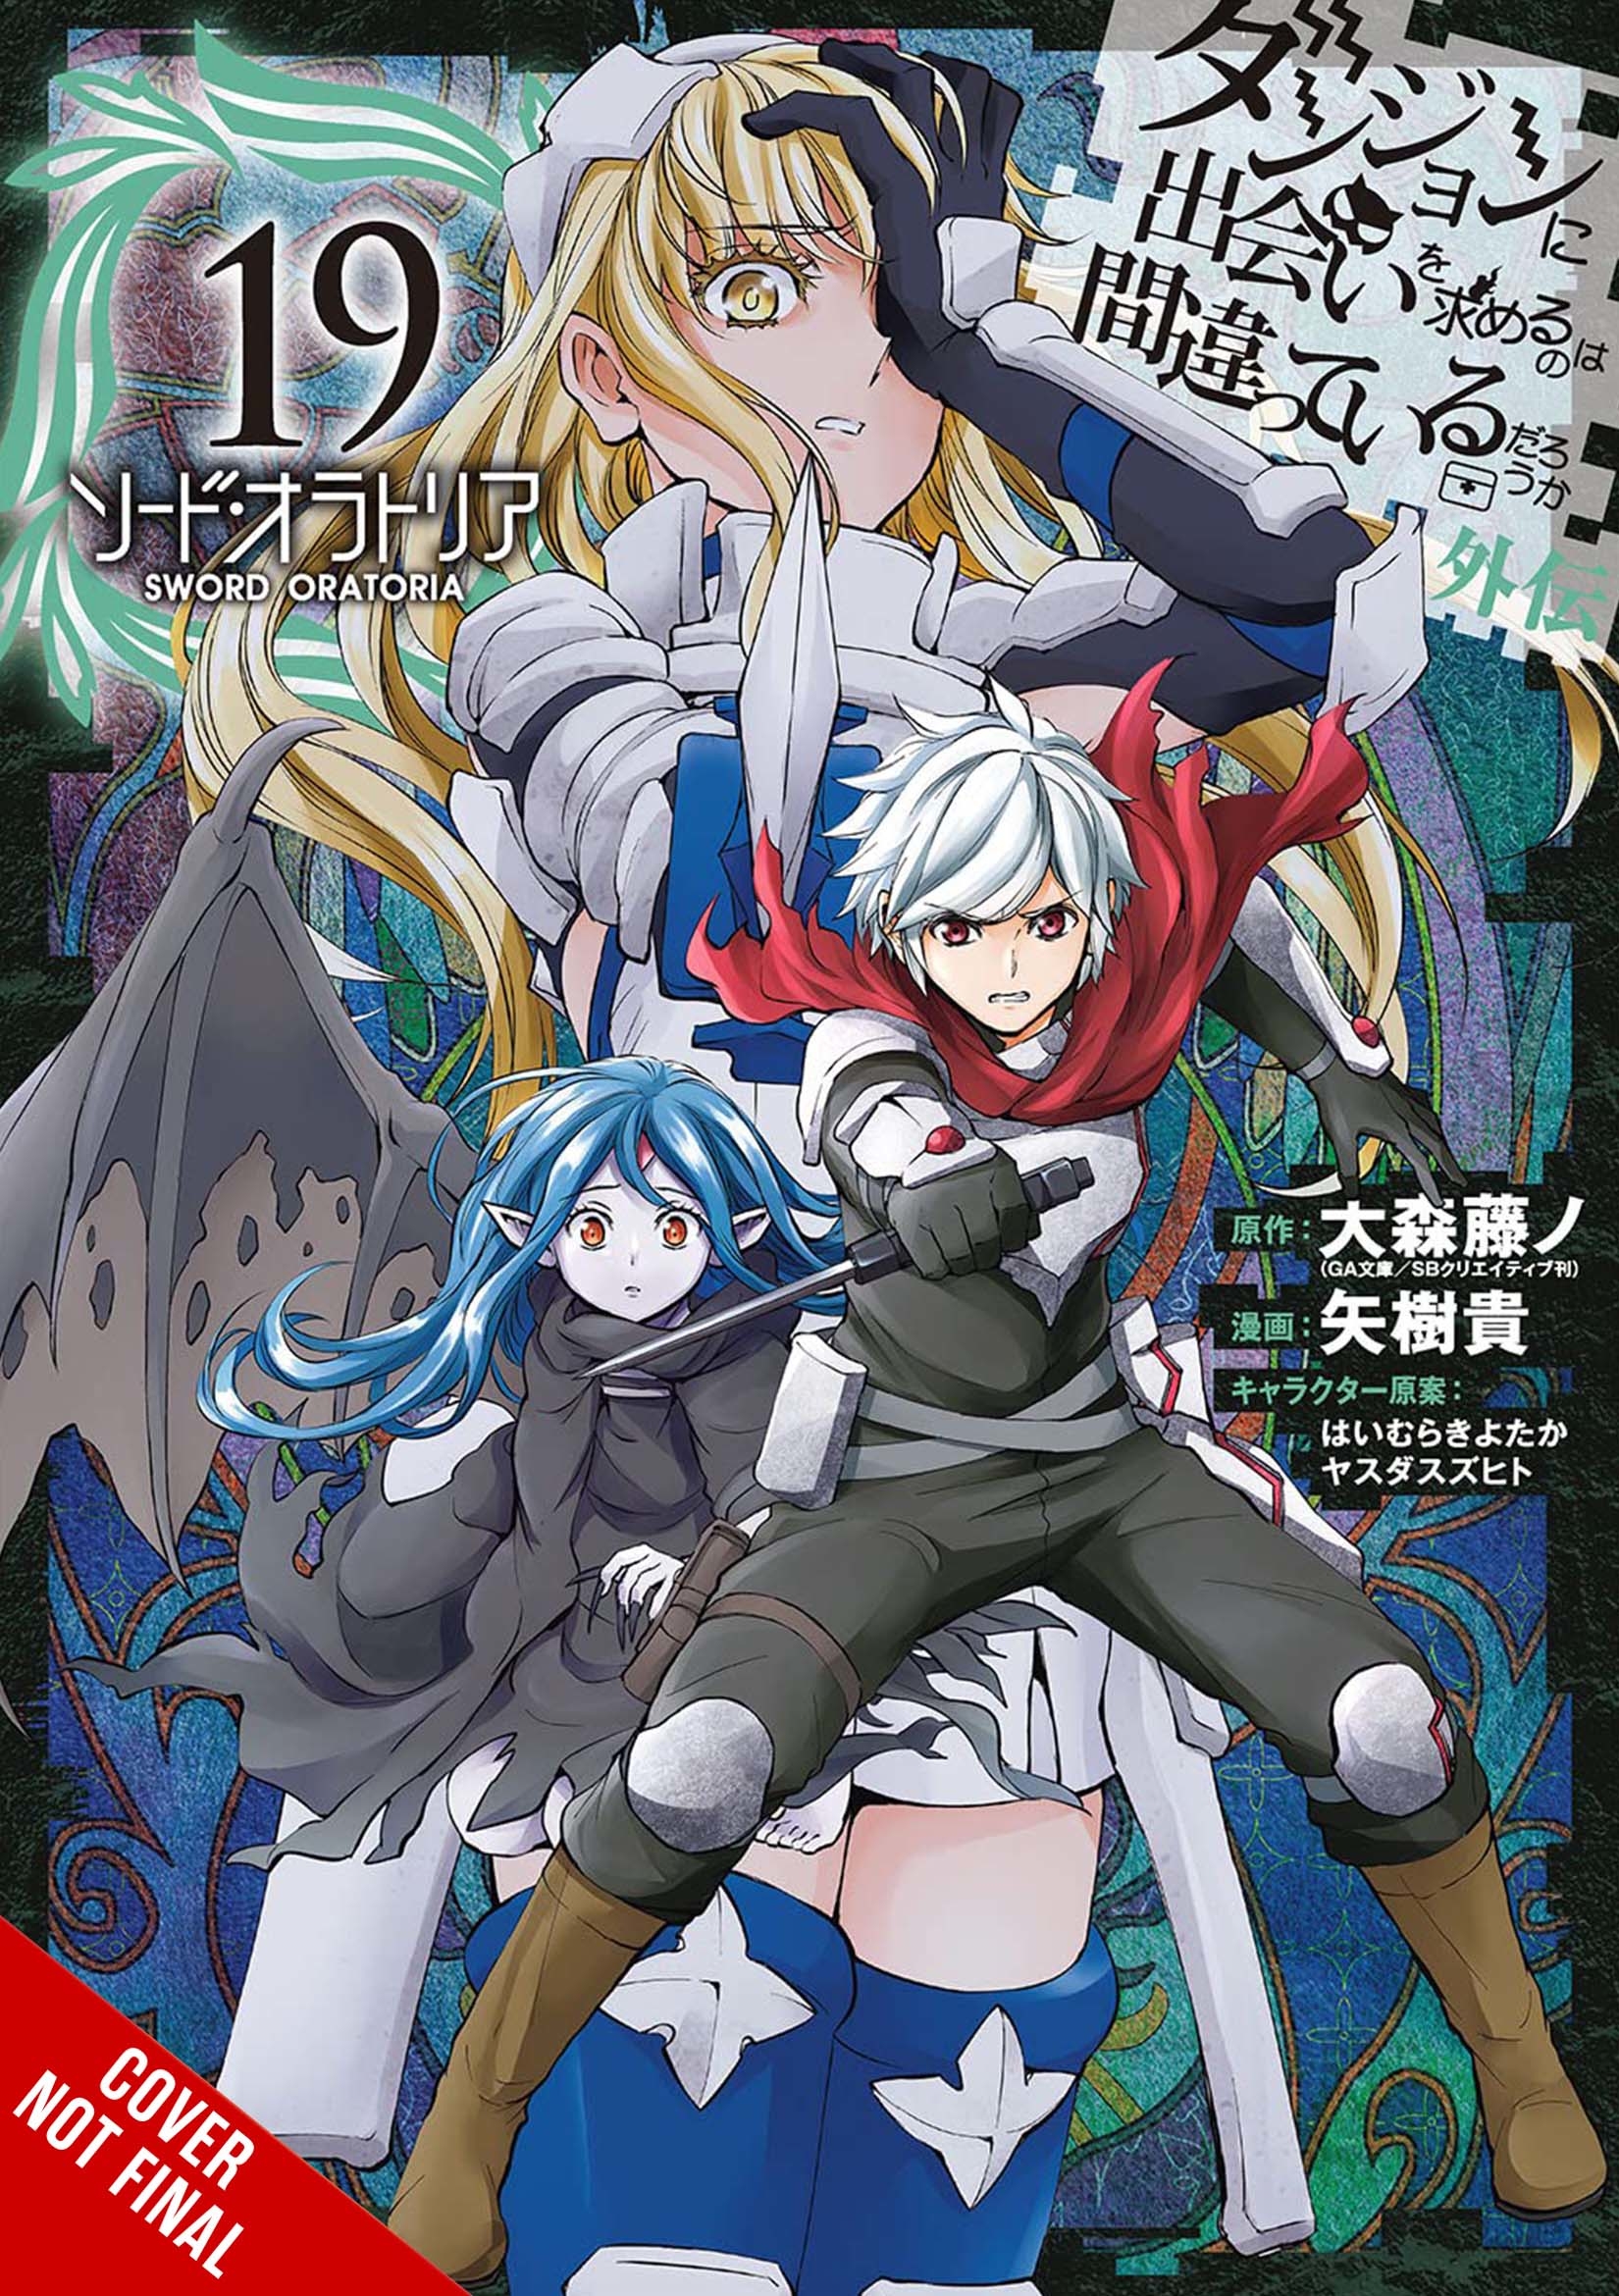 Is it Wrong to Pick Up Girls in a Dungeon Sword Oratoria Manga Volume 19 (Mature)